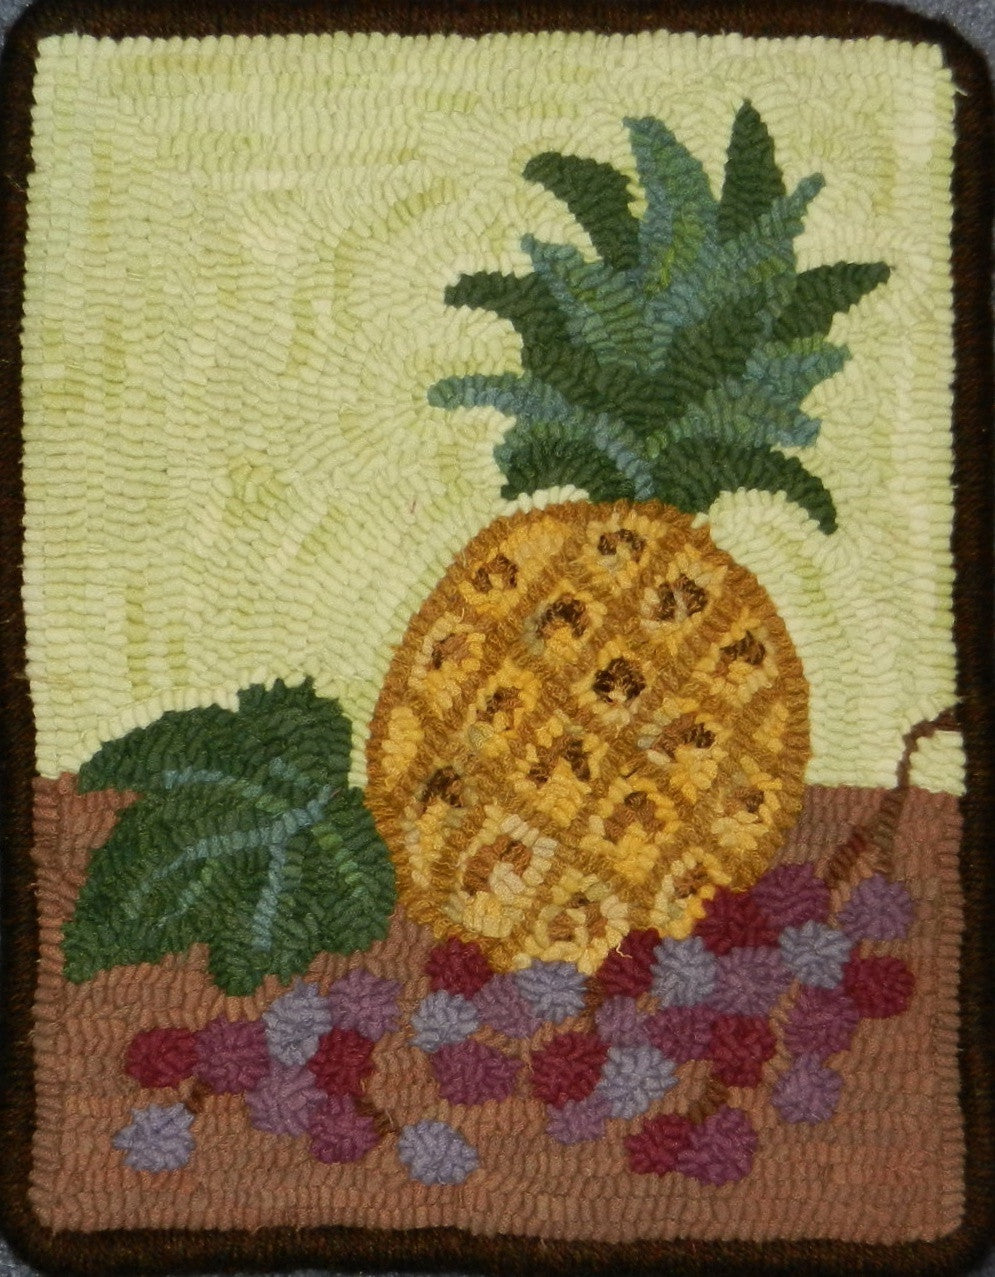 P624: Pineapple Still Life, Hooked by Carolyn Cooke